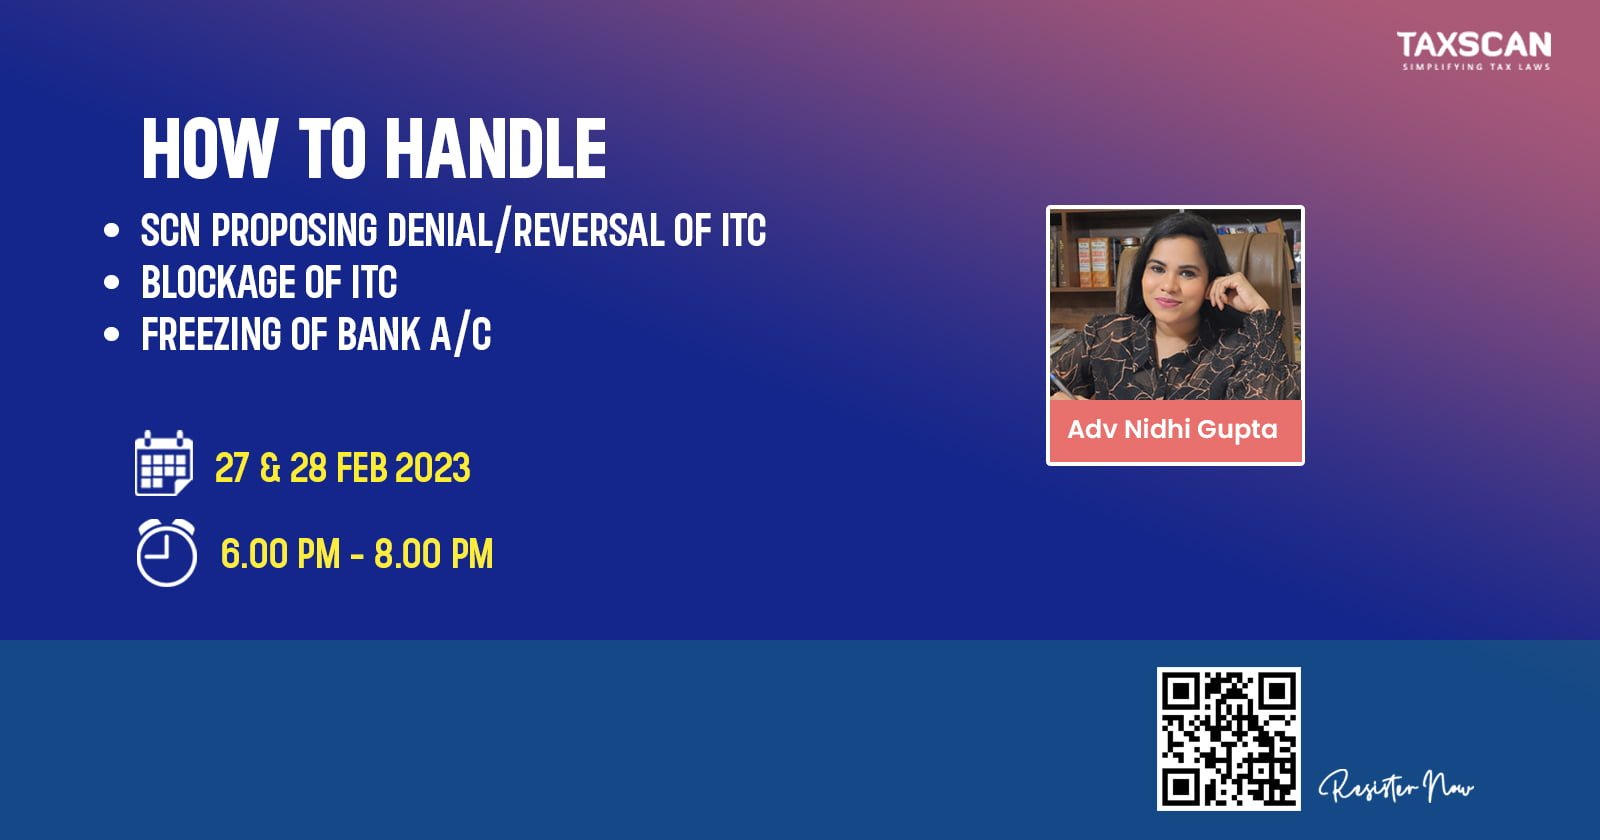 HOW TO HANDLE - SCN PROPOSING DENIAL - SCN - REVERSAL OF ITC - ITC - BLOCKAGE OF ITC - freezing of bank account - Certificate Course - online certificate course - certificate course 2023 - taxscan - taxscan academy